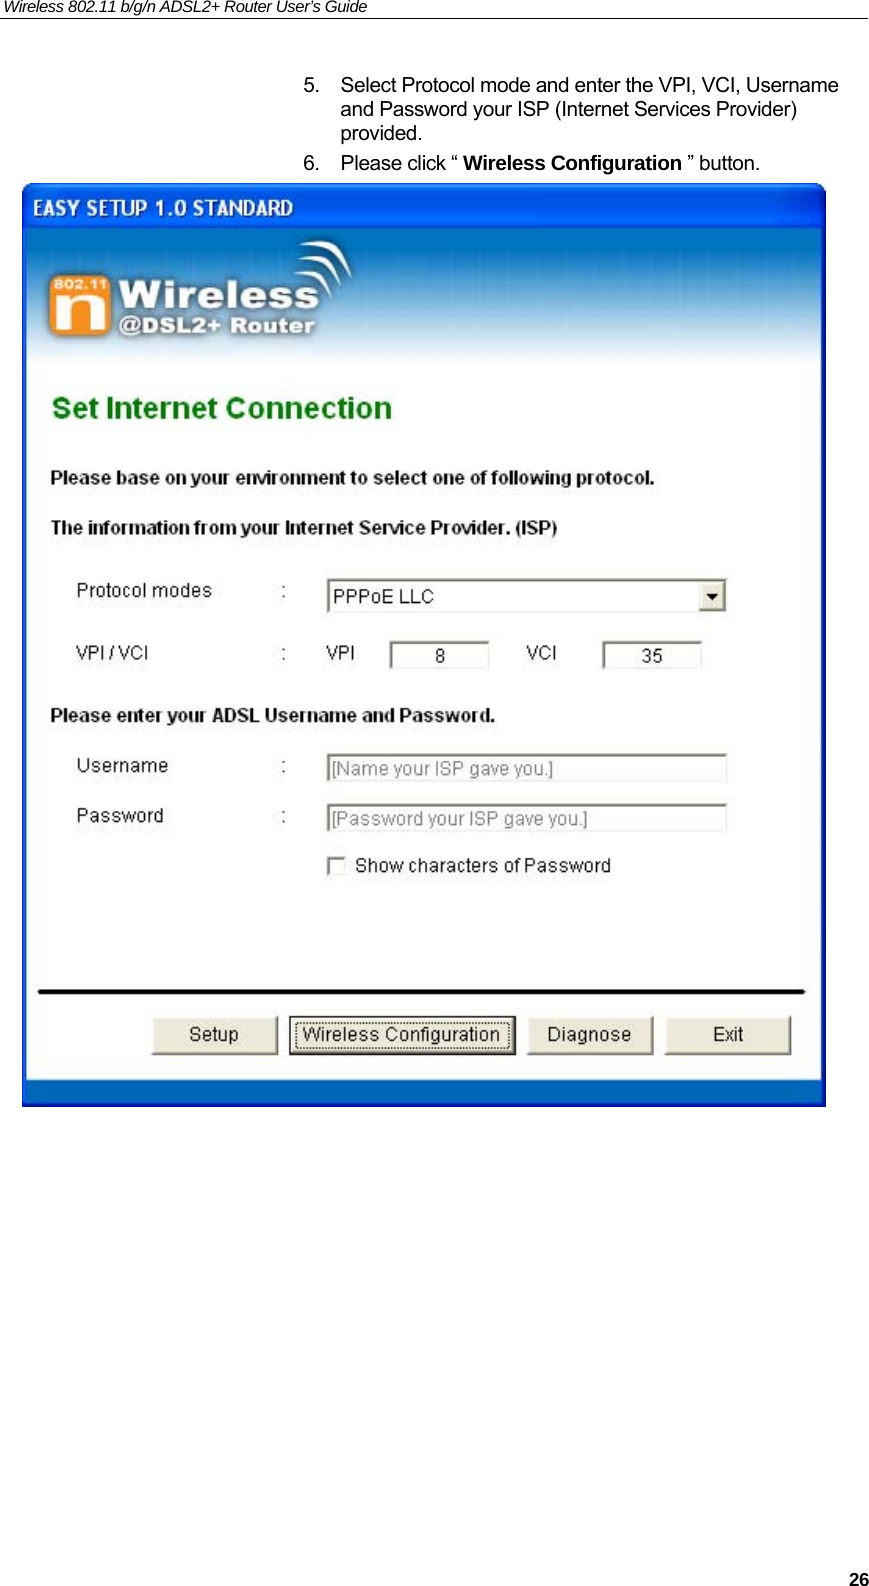 Wireless 802.11 b/g/n ADSL2+ Router User’s Guide    5.  Select Protocol mode and enter the VPI, VCI, Username and Password your ISP (Internet Services Provider) provided. 6.  Please click “ Wireless Configuration ” button.             26